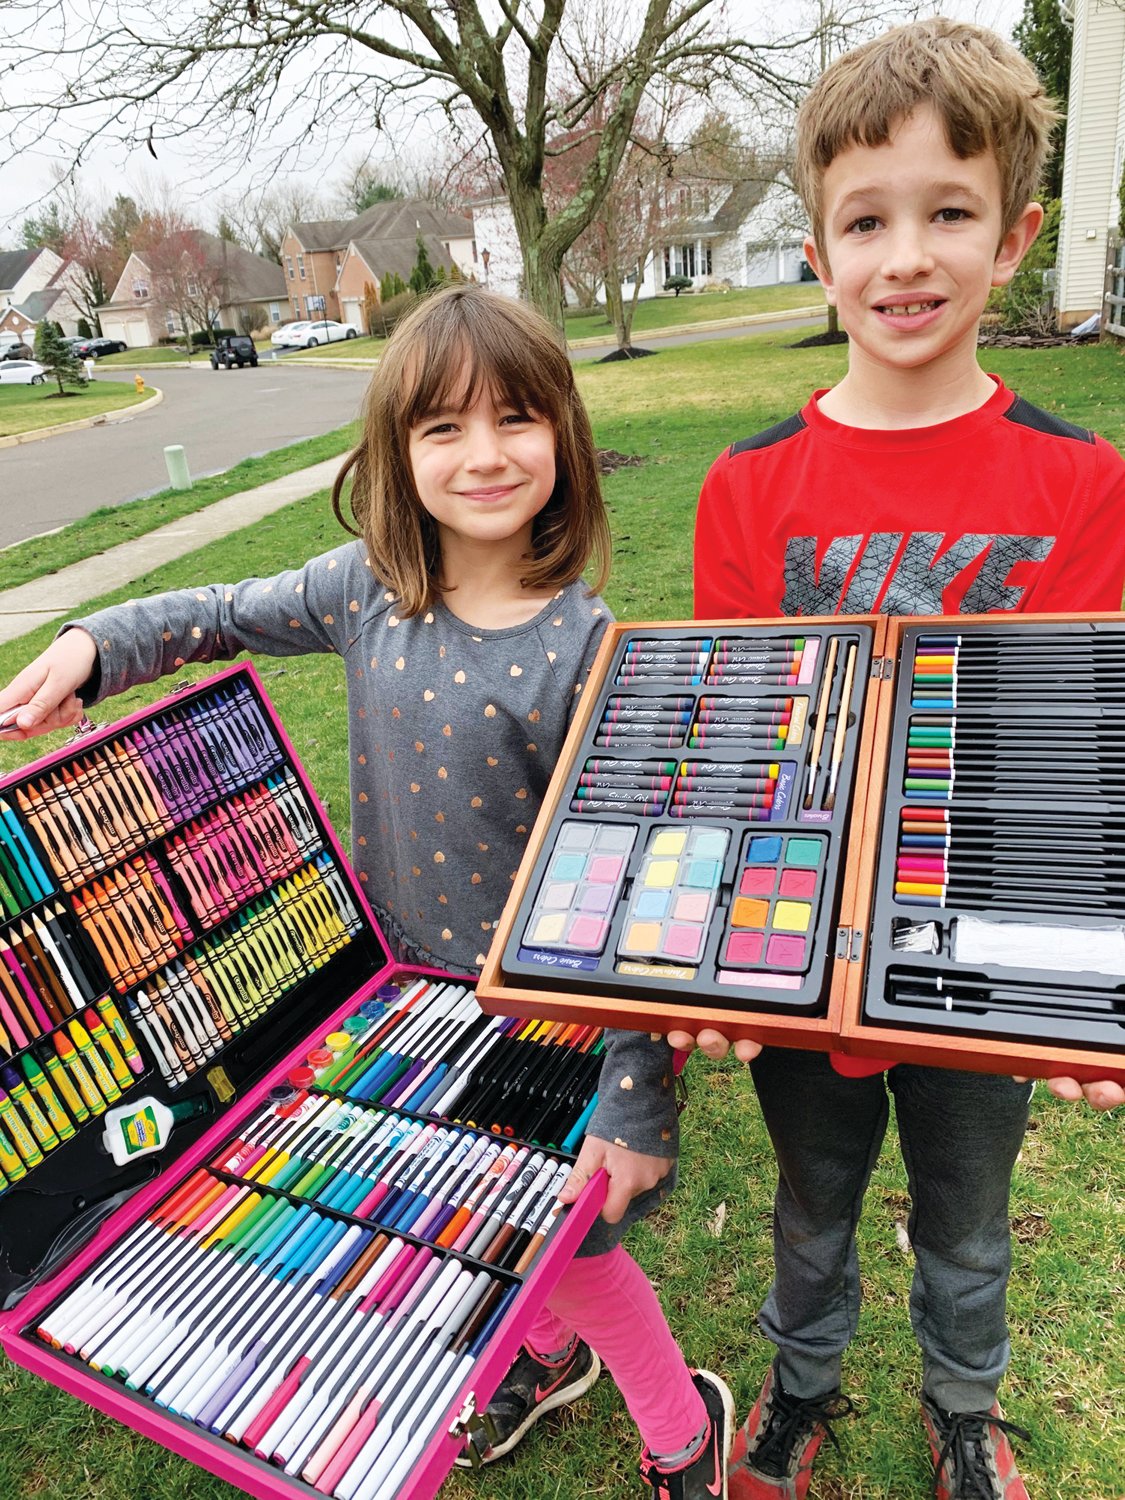 Emma and Henry Doone with their art supplies getting ready to spread some sunshine.